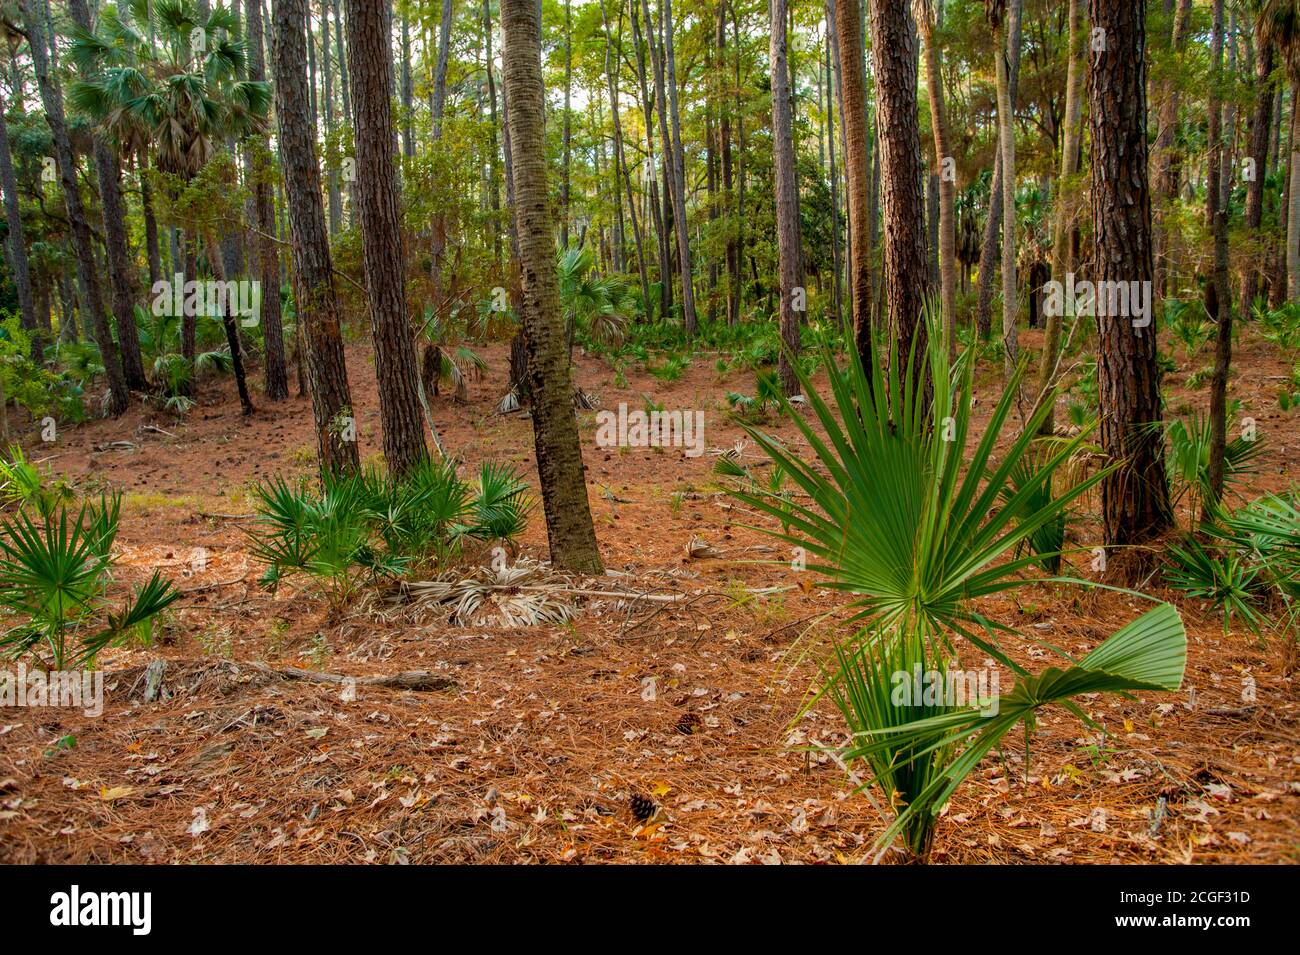 A Loblolly Pine (Pinus taeda) forest with dwarf palmetto palm trees located in Hunting Island State Park on Hunting Island near Beaufort, South Caroli Stock Photo